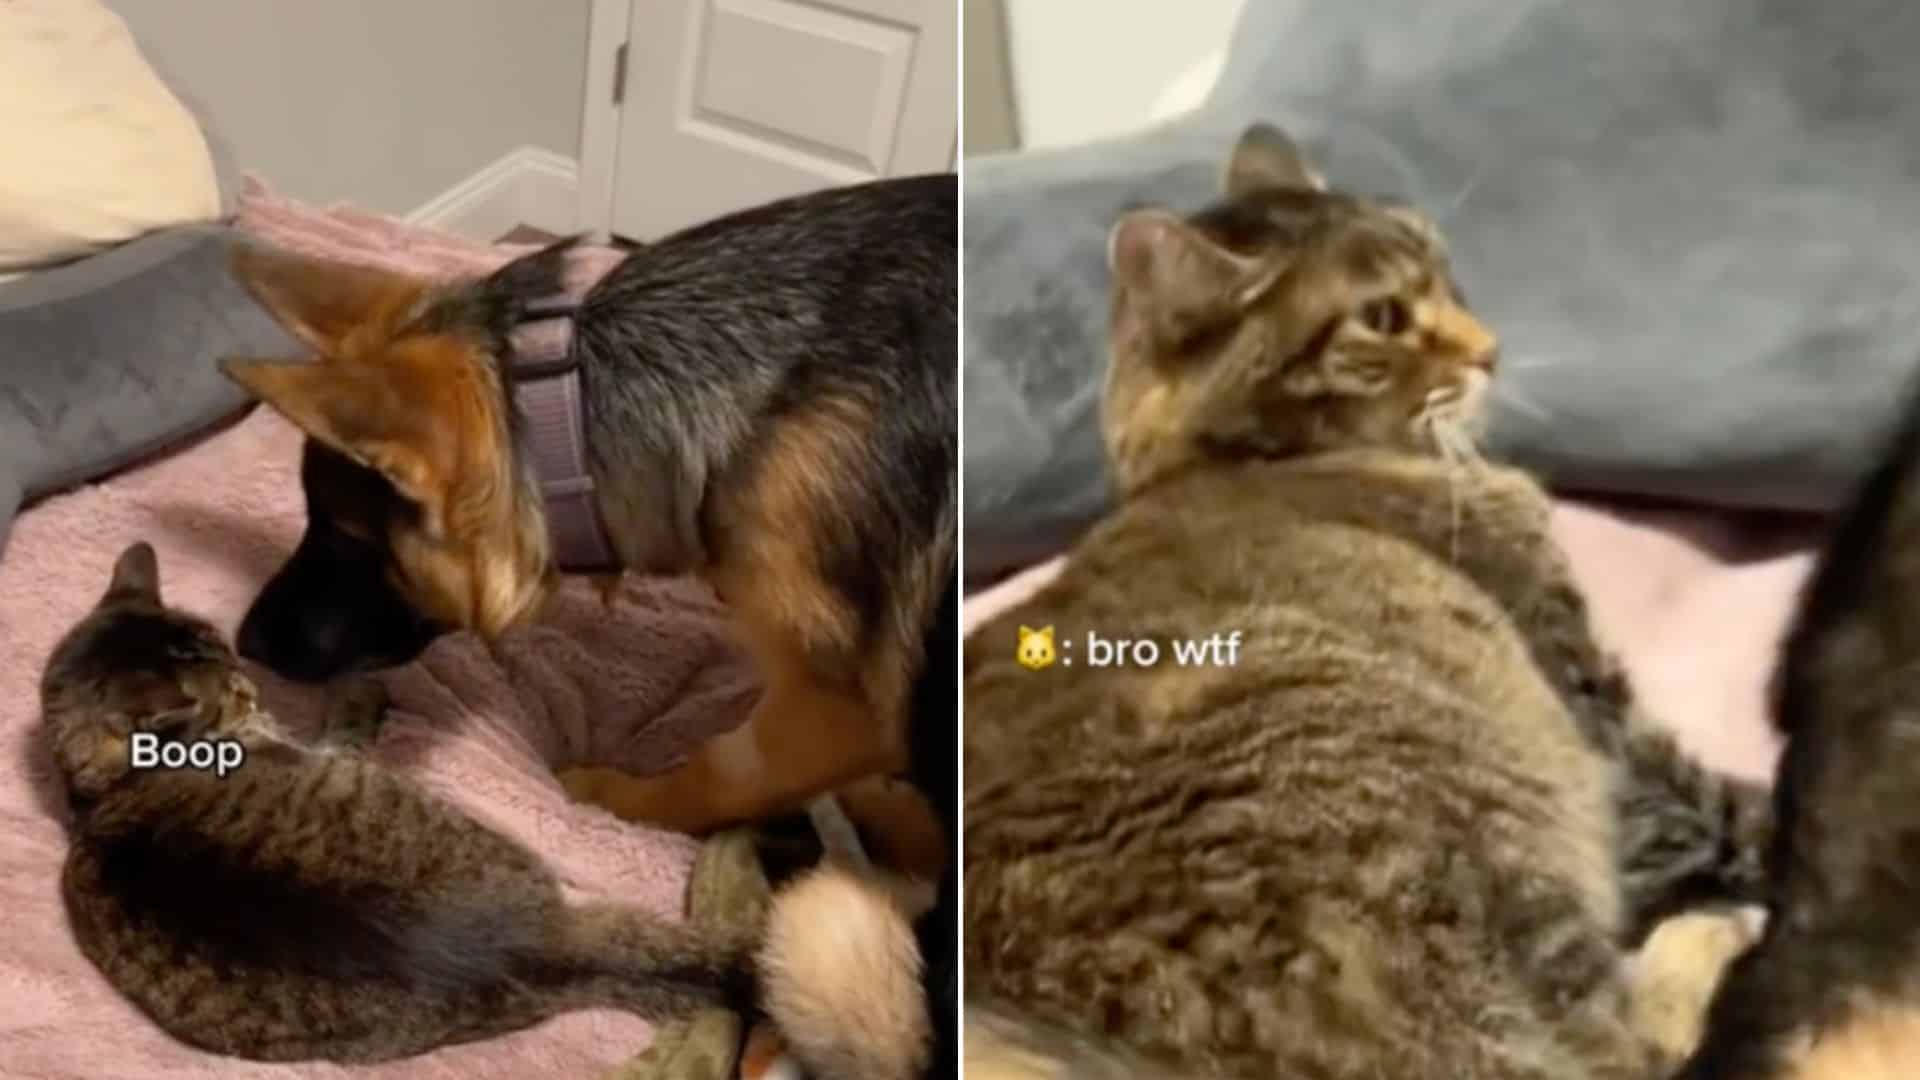 Watch This Hilarious German Shepherd Trying To Make Friends With A Grumpy Cat